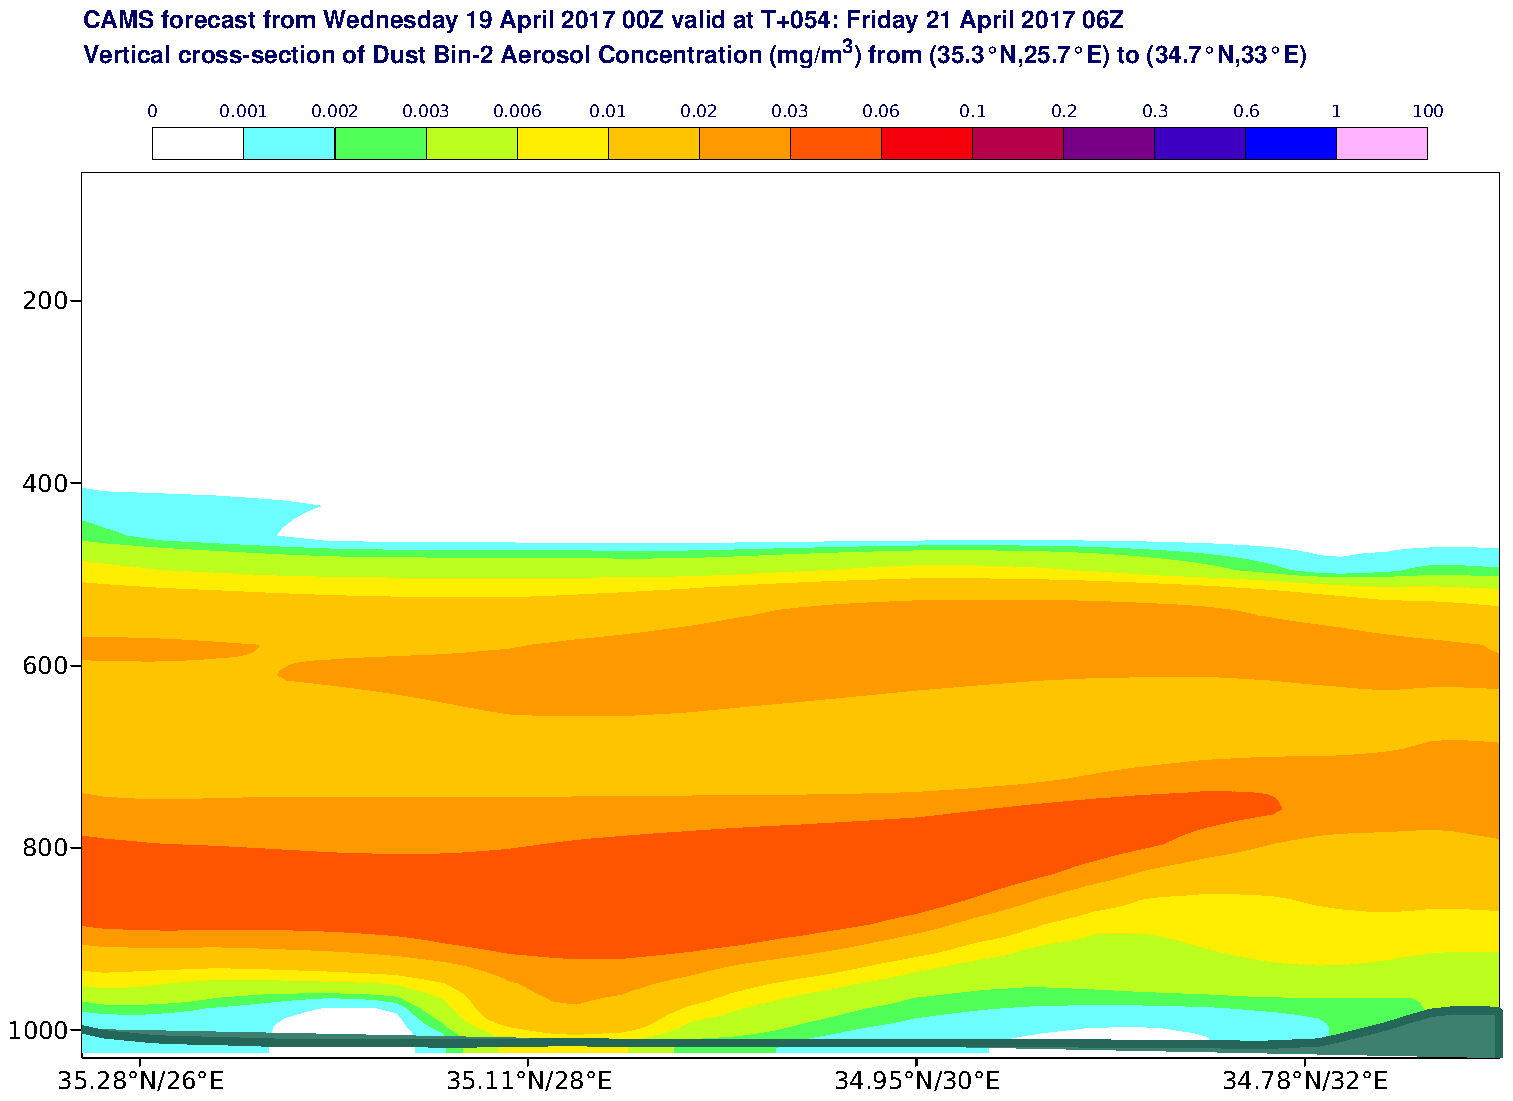 Vertical cross-section of Dust Bin-2 Aerosol Concentration (mg/m3) valid at T54 - 2017-04-21 06:00